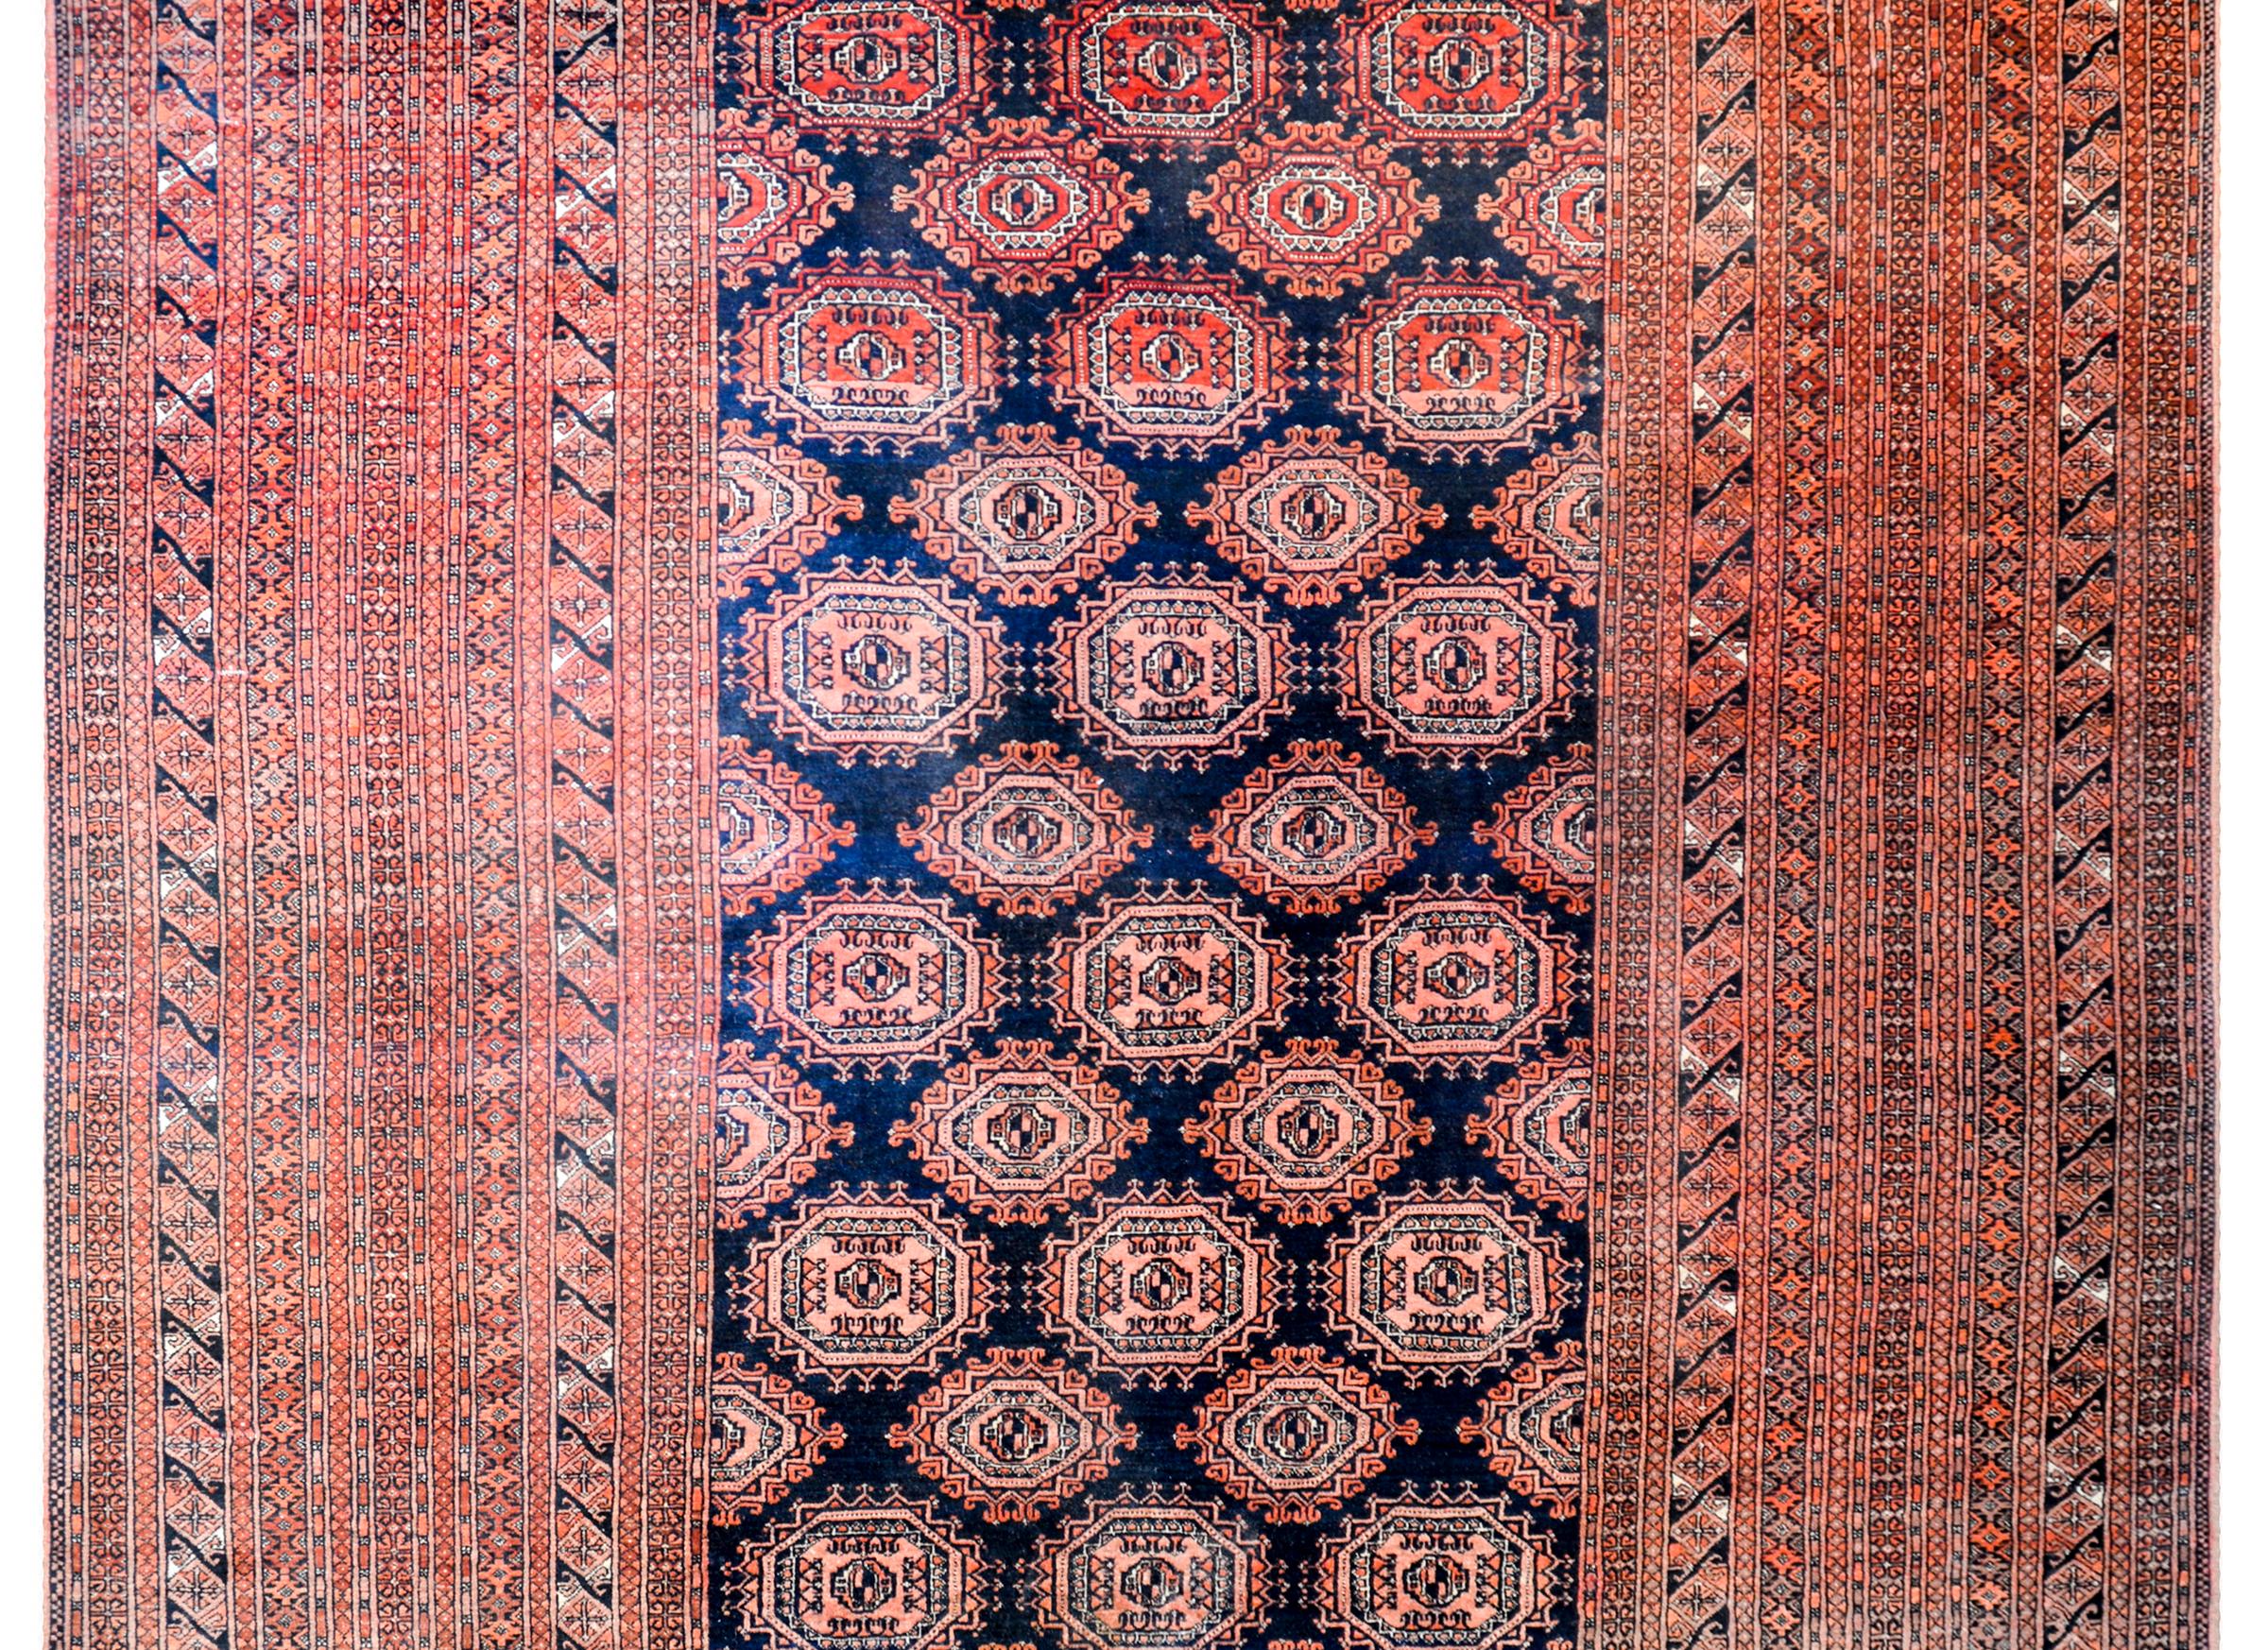 A gorgeous early 20th century Afghani Bashir rug with an elaborately woven field of stylized geometric flowers. The border is unbelievable, occupying about 60% of the overall rug design. Myriad thin stripes, each containing a petite geometric or